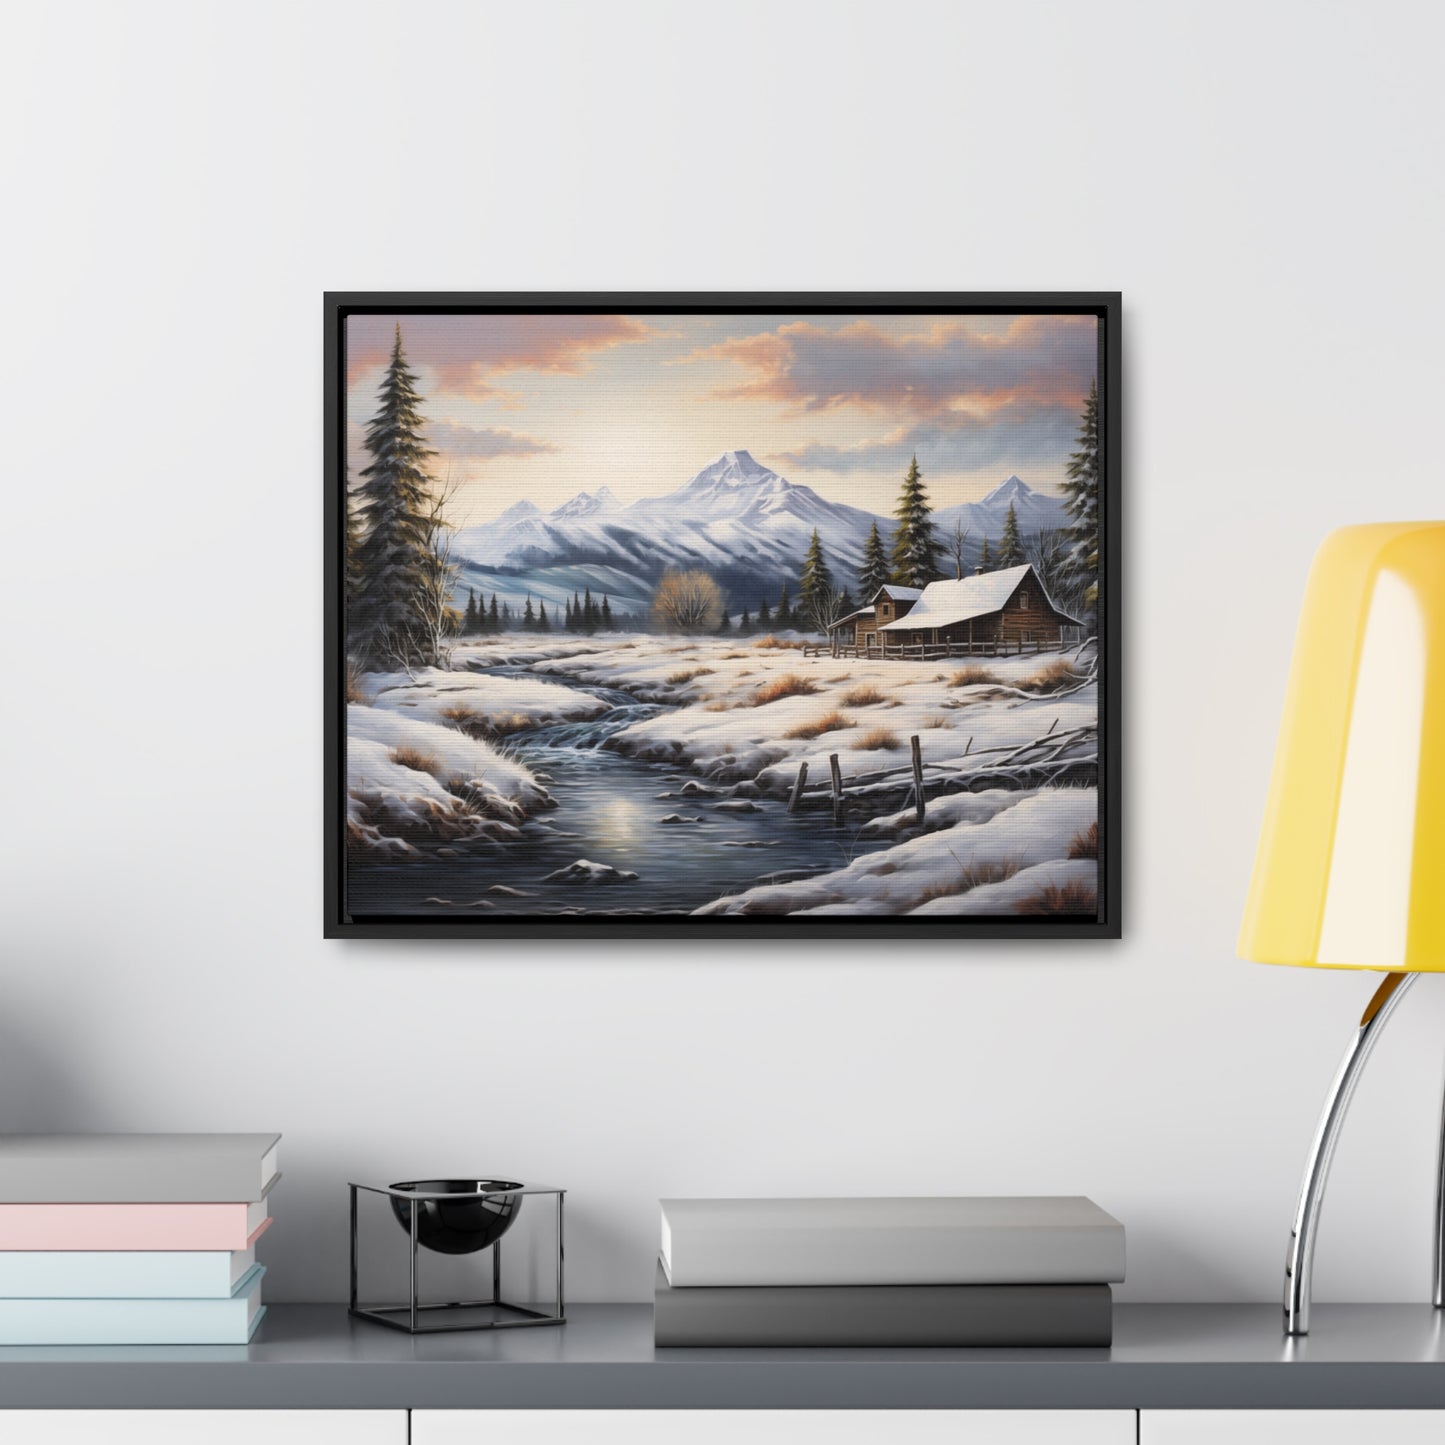 Rustic Log Cabin in the Snow - Gallery Canvas Wrap, Horizontal Frame